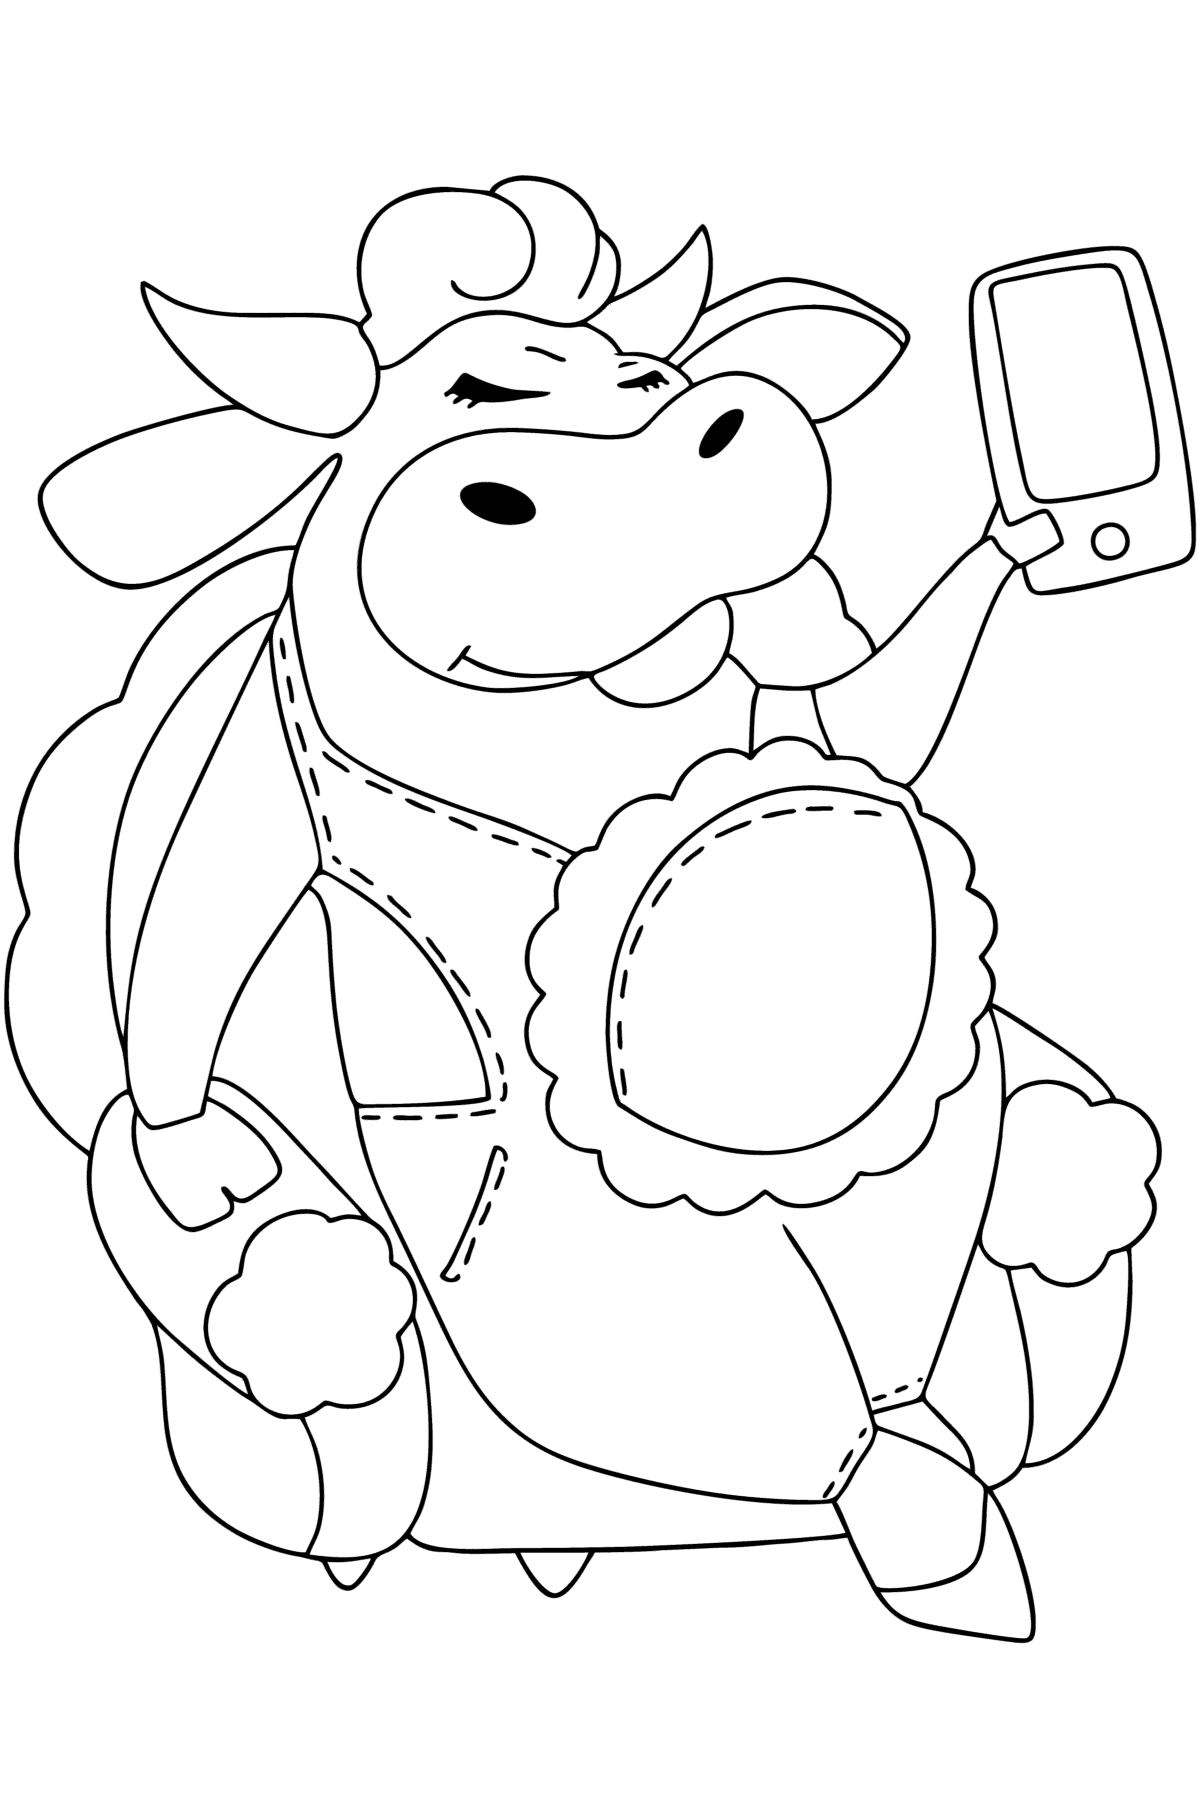 Funny cow coloring page - Coloring Pages for Kids